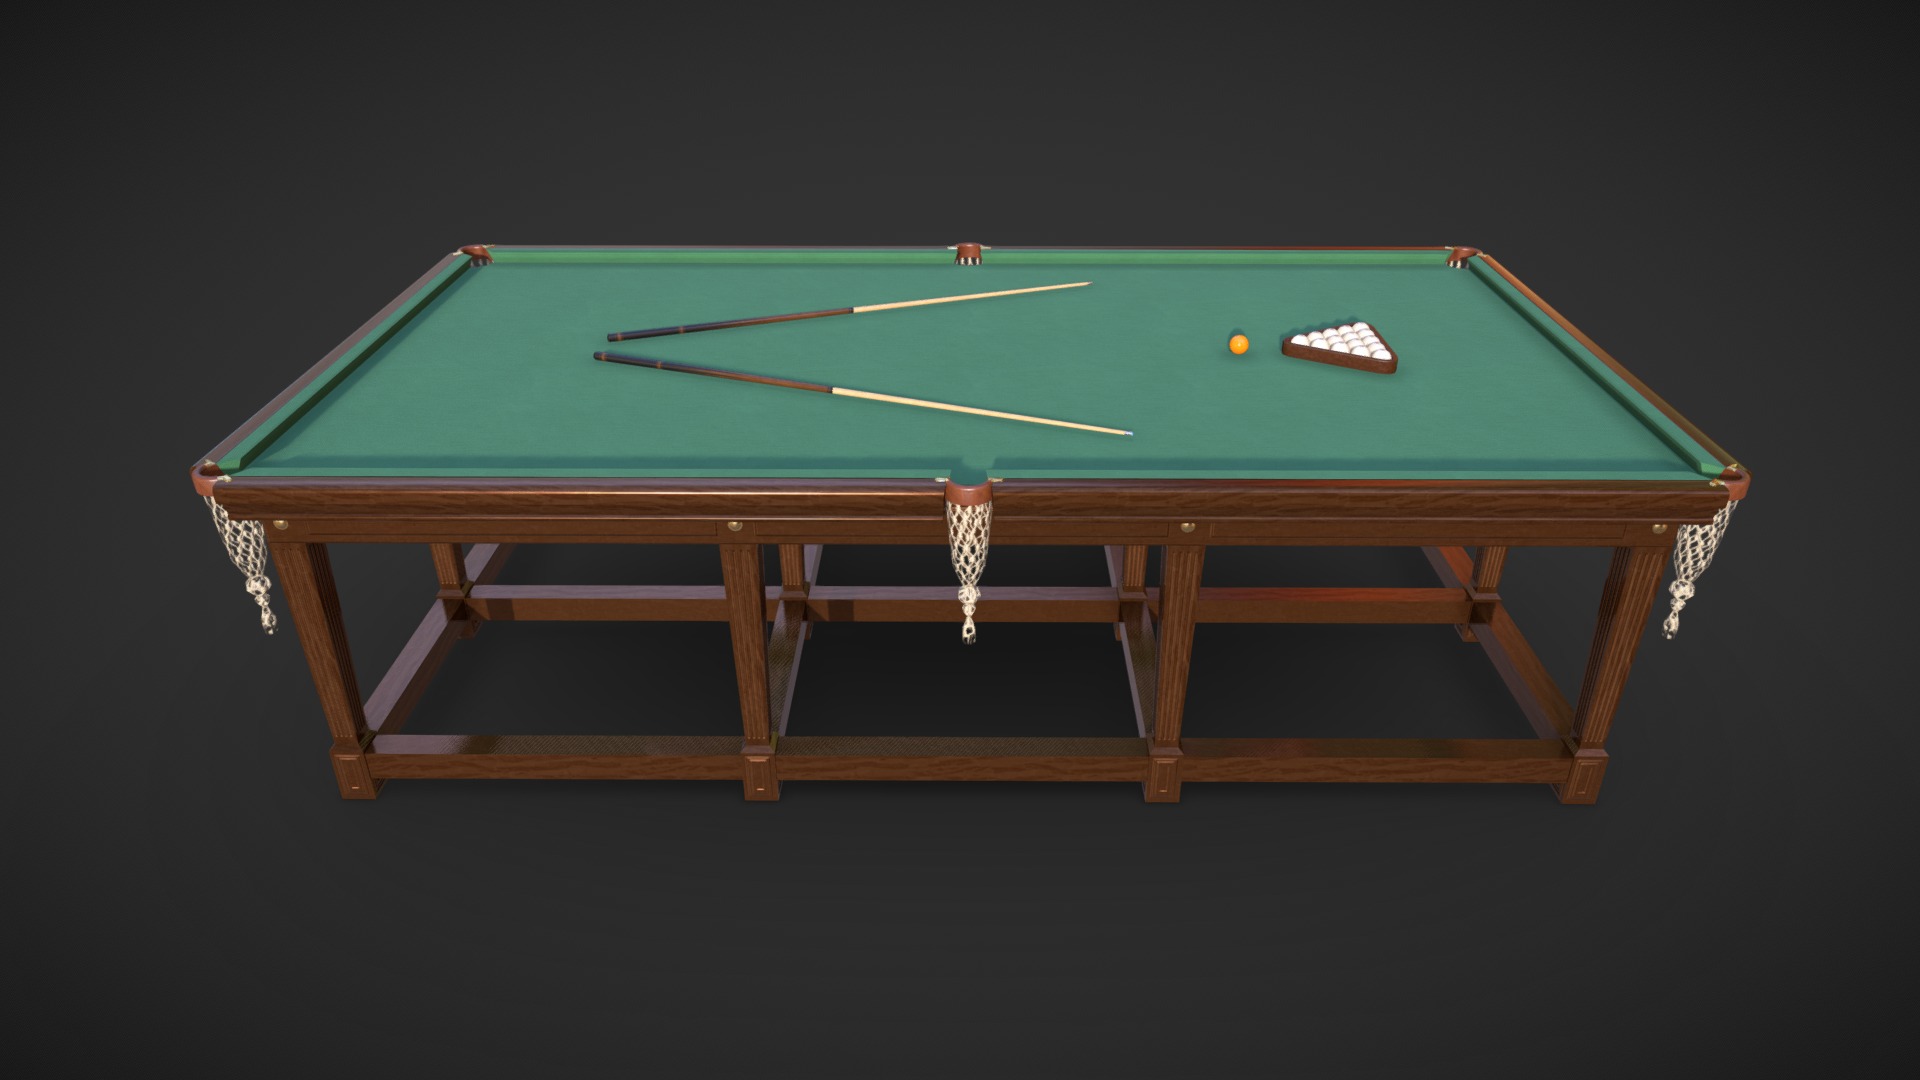 This billiard table I made for Russian Estate House modular pack for UE4 as a prop for Billiard Room. 
Download files include 4K textures, OBJ and FBX files - Billiard Table - 3D model by Mikhail Kadilnikov (@MikhailKadilnikov) 3d model